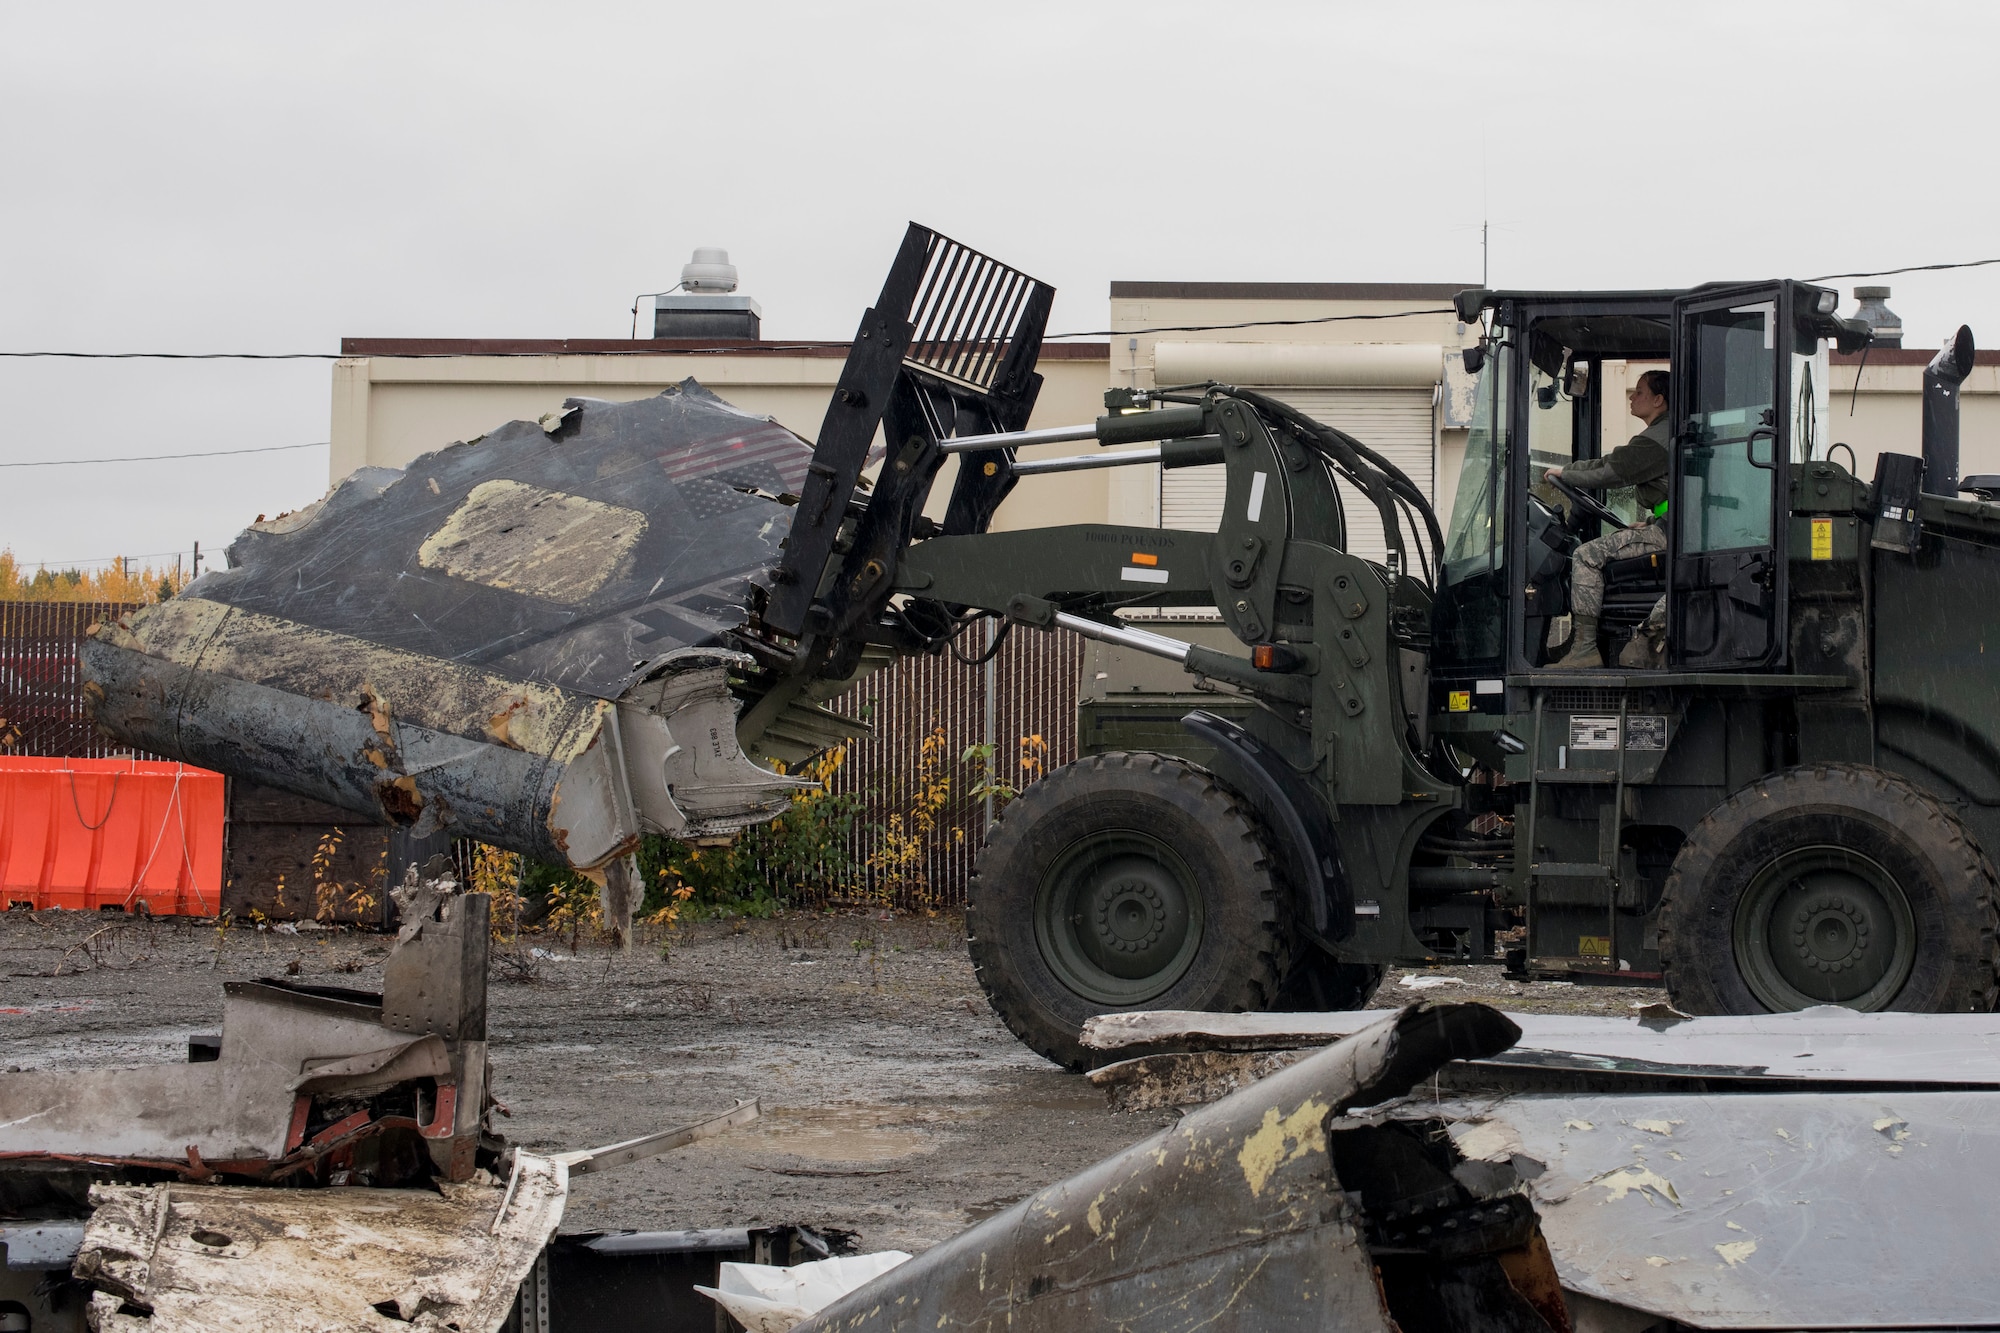 U.S. Air Force Airman 1st Class Pamela Proteau, a 773d Logistics Readiness Squadron vehicle operator, picks up part of a wing using a 10k all-terrain forklift to remove wreckage debris at Joint Base Elmendorf-Richardson, Alaska, Sept. 28, 2018. Proteau was part of a large wreckage disposal team whose mission was to remove debris from the fatal crash of the Sitka 43 C-17 Globemaster III that had been stored at JBER since 2010. After multiple shipments, the ‘Sitka 43’ wreckage is finding a new purpose at the Air Force Safety Center (AFSEC) Crash Lab at Kirtland Air Force Base, N.M.